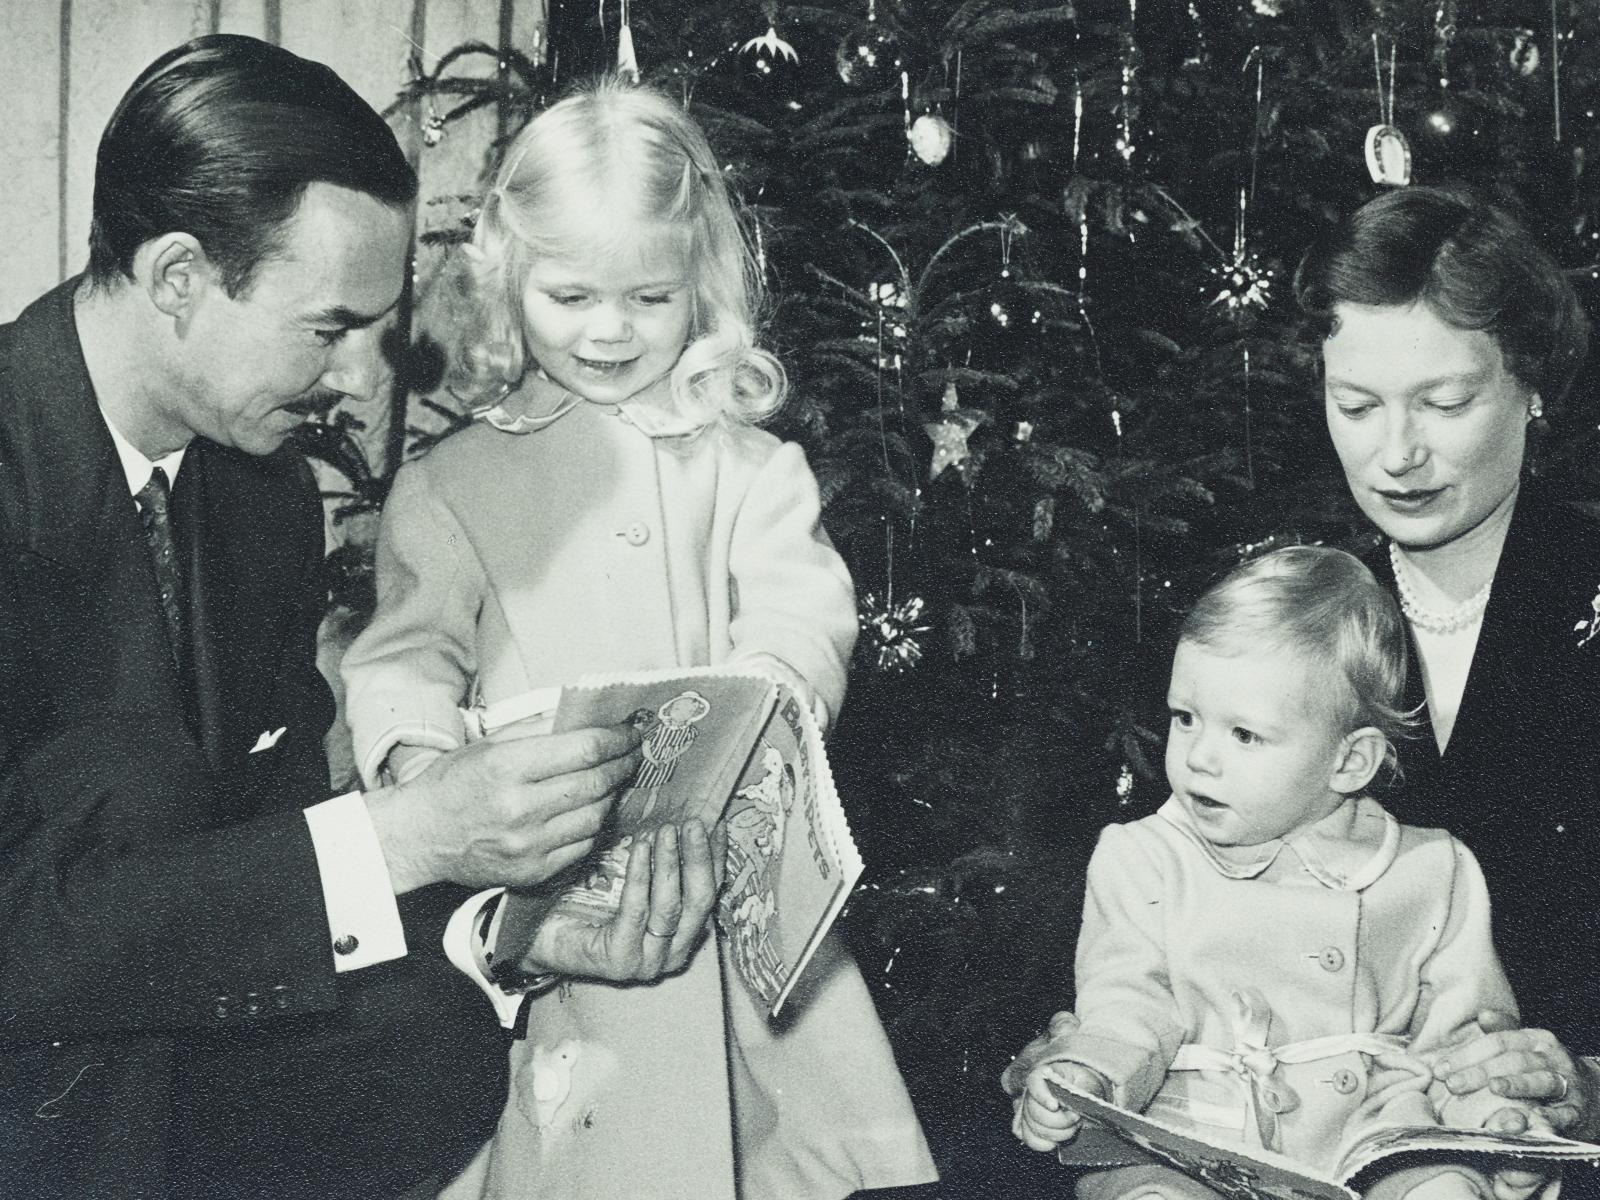 The Grand Ducal Family under the Christmas tree